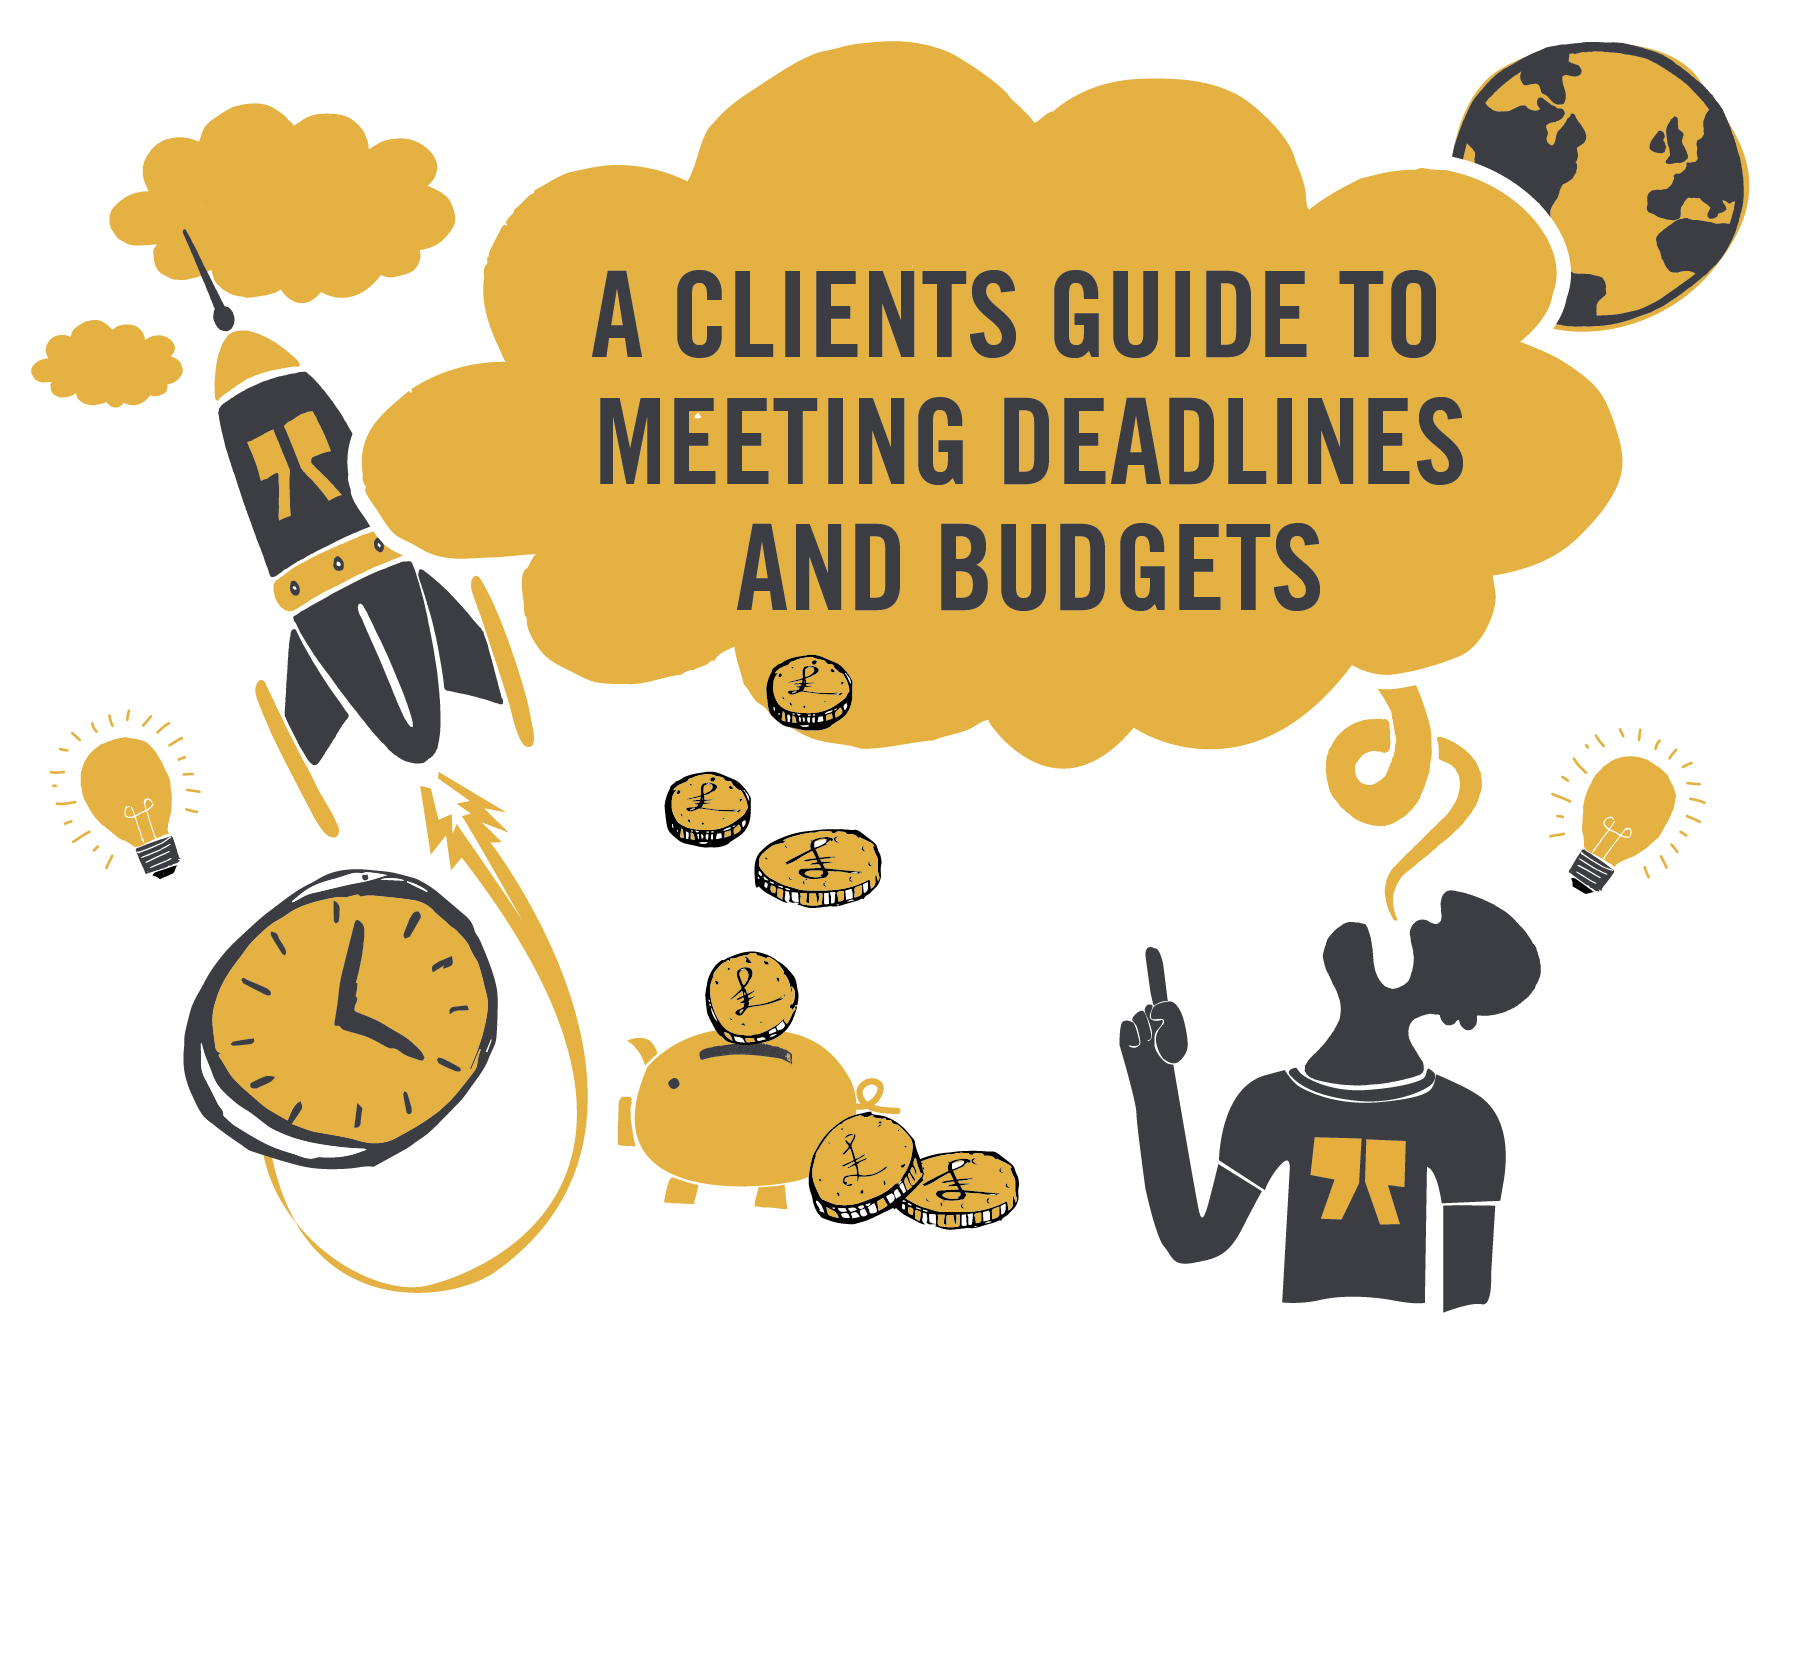 Clients guide to deadlines and budgets